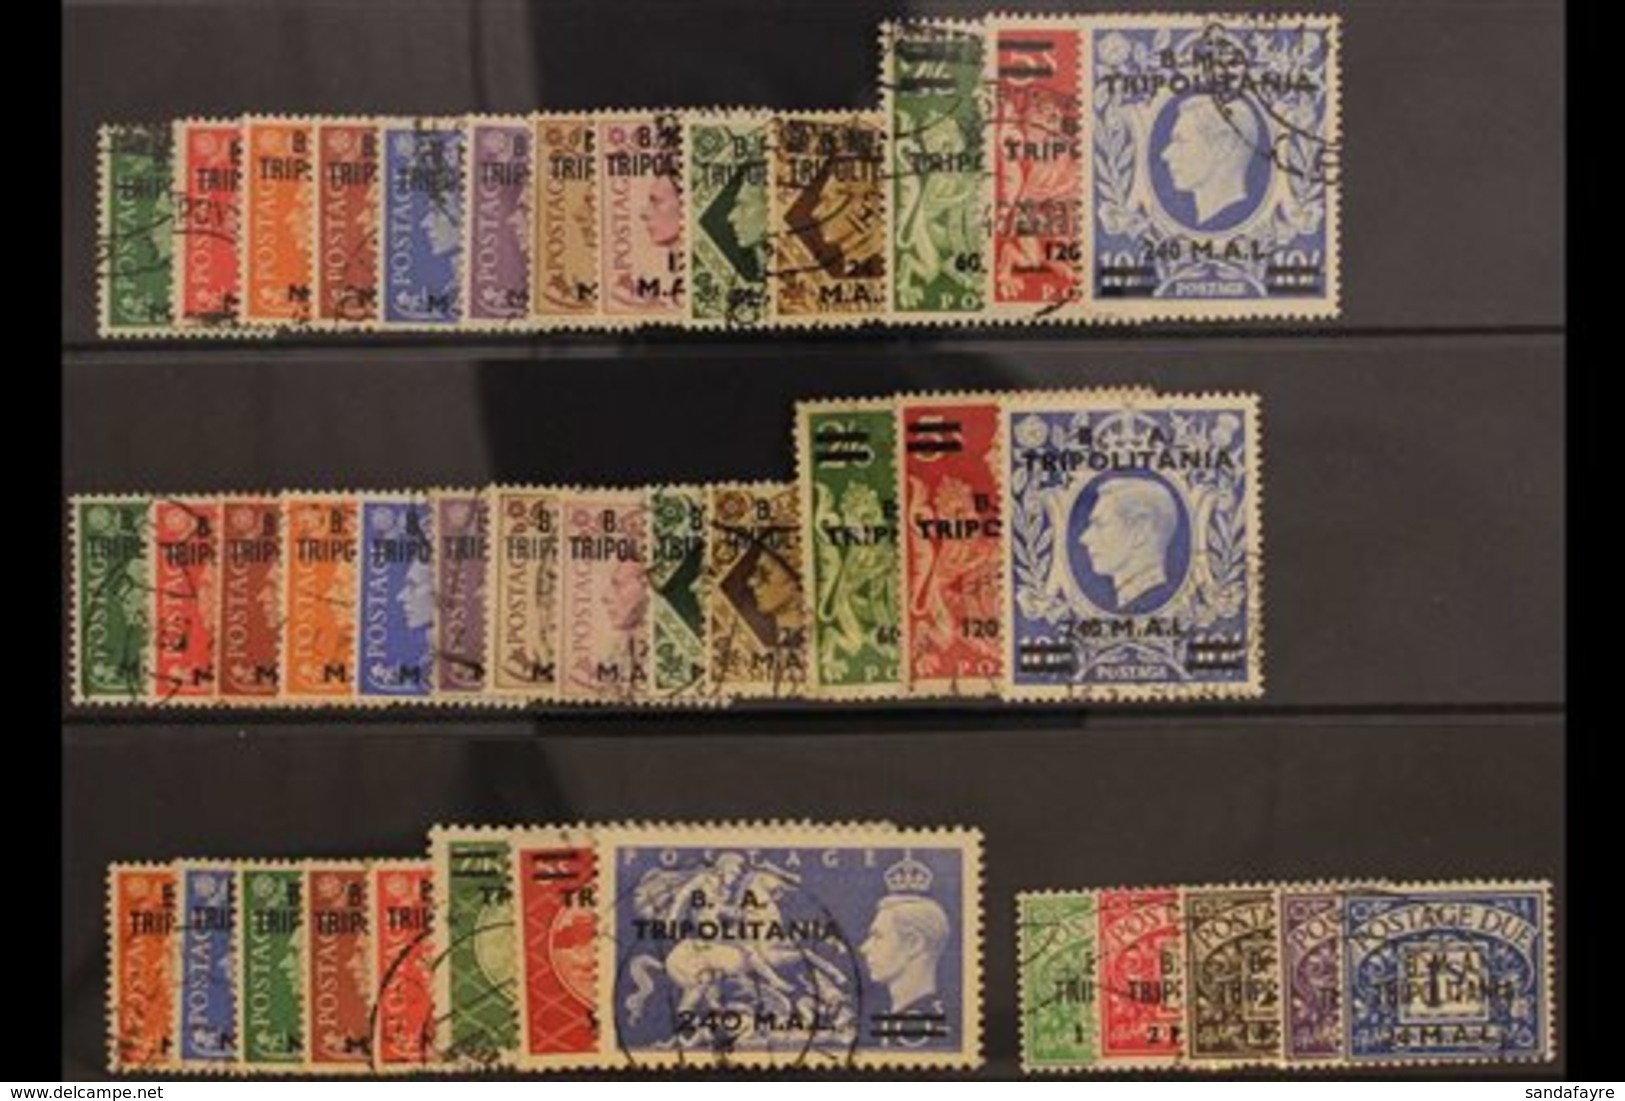 TRIPOLITANIA 1948 - 51 Complete Used Less The 1950 Postage Due Set, SG T1-34, TD1 - 5, Fine To Very Fine Used. (39 Stamp - Italian Eastern Africa